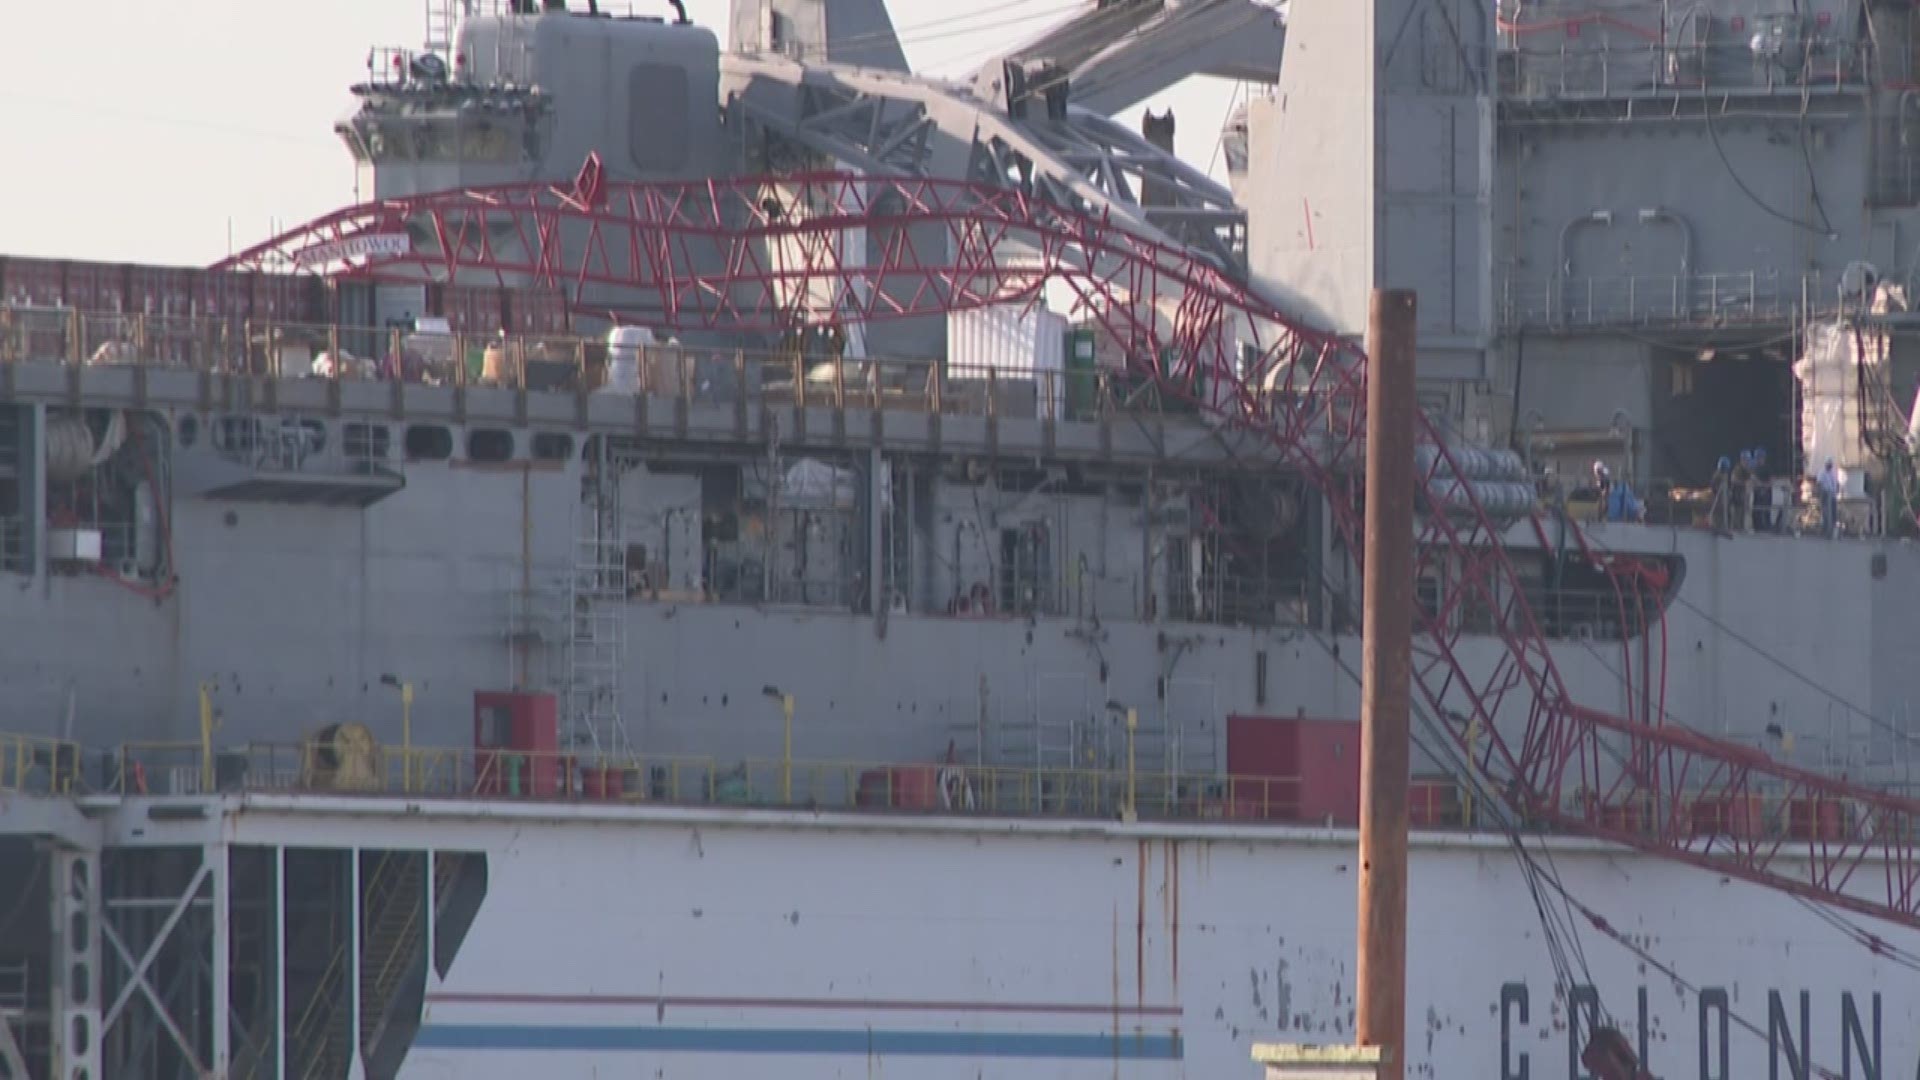 Two sailors were injured when a Colonna's Shipyard crane boom fell onto the USS Gunston Hall. The sailors suffered minor injuries.